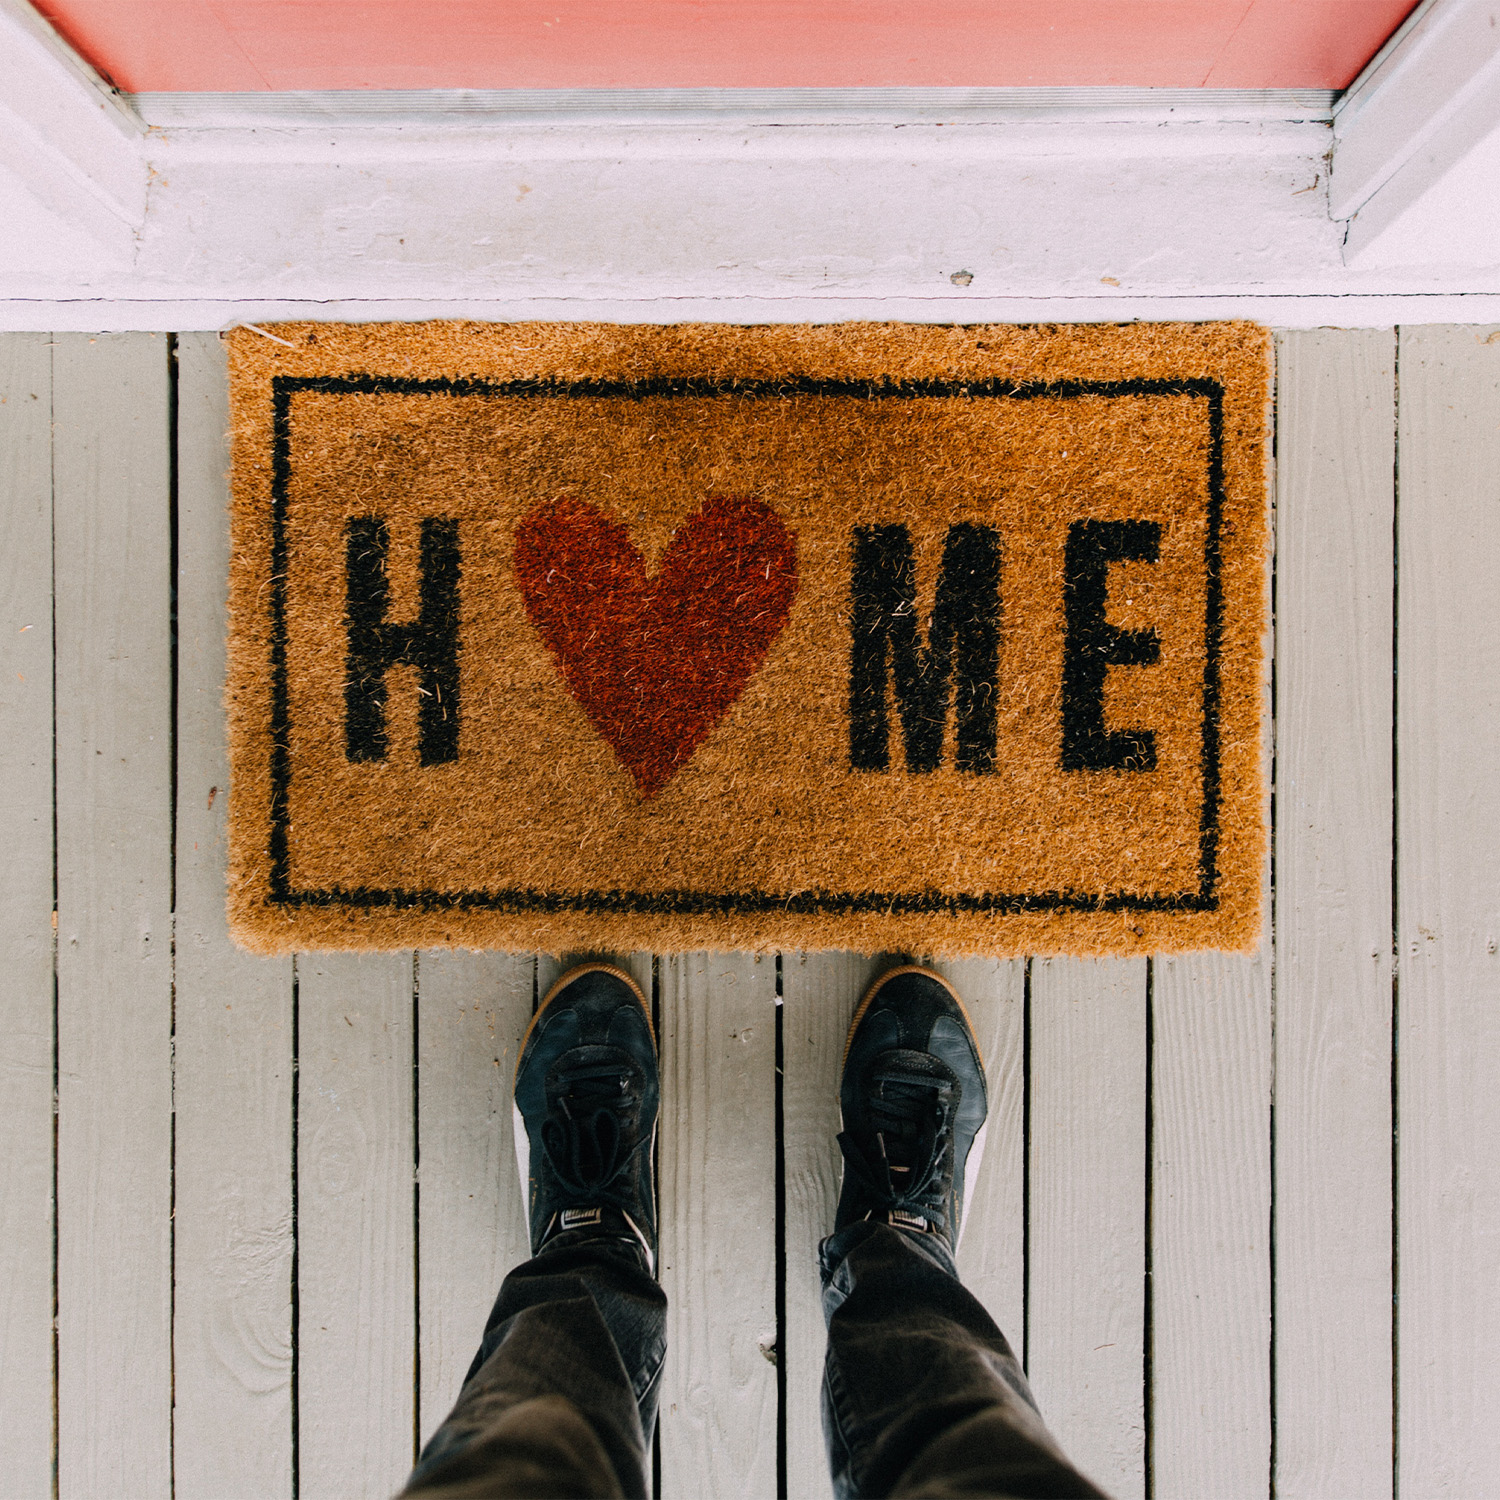 Becoming a home owner